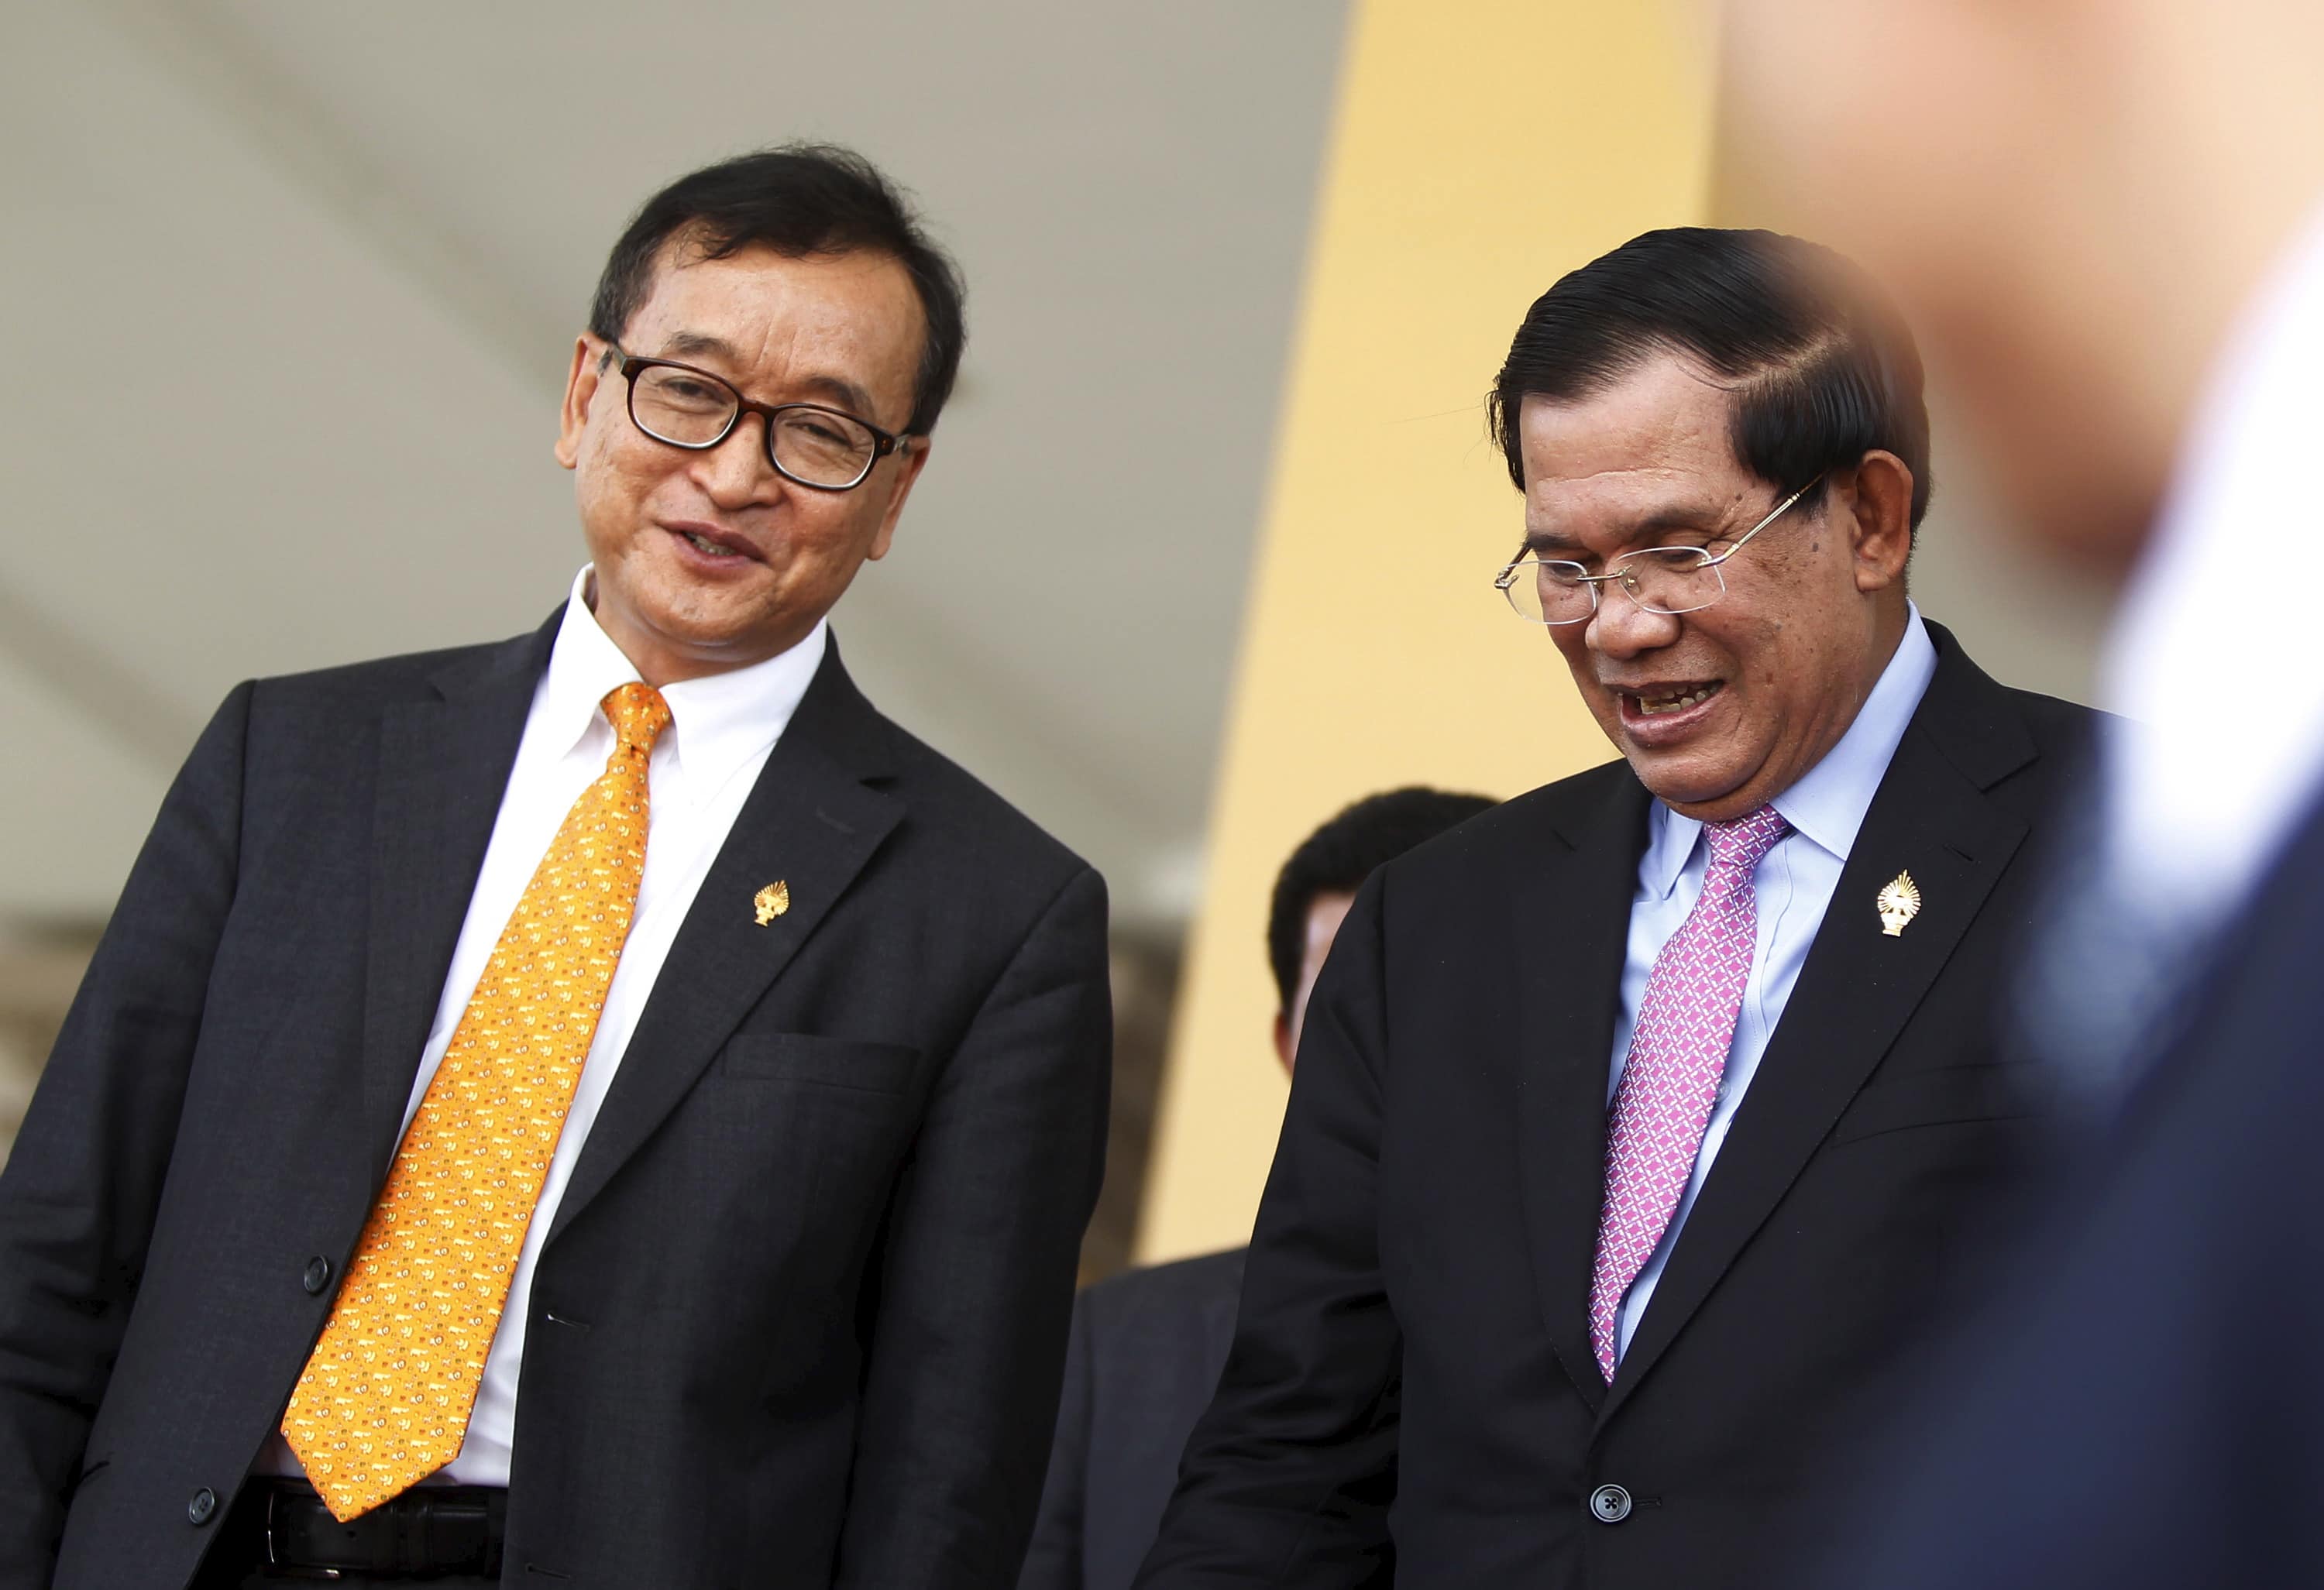 Cambodia's Prime Minister Hun Sen (R) and Sam Rainsy, president of the Cambodia National Rescue Party (CNRP), smile after a plenary session at the National Assembly in Phnom Penh, 9 April 2015, REUTERS/Samrang Pring